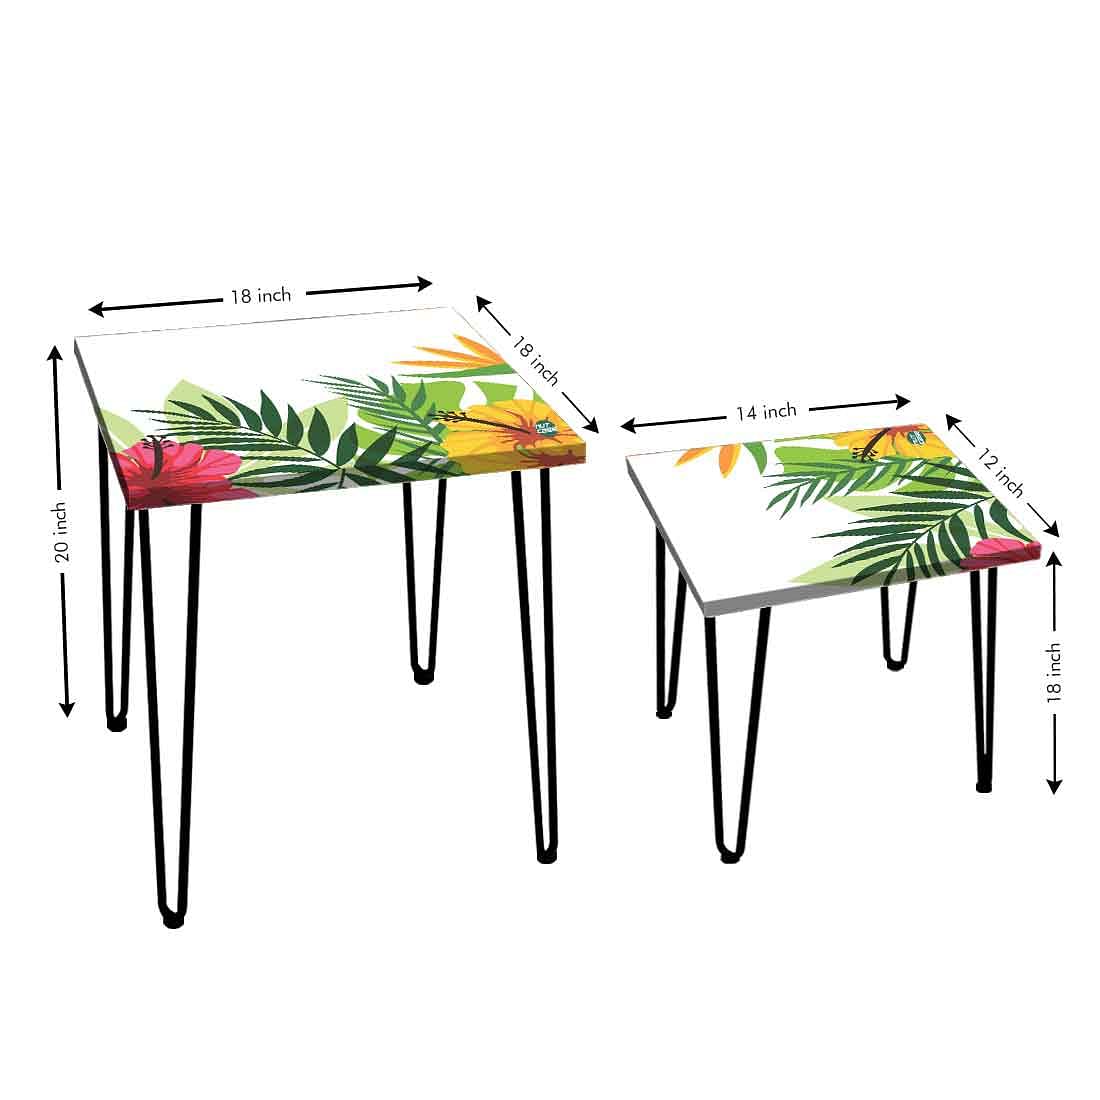 Designer Nest of Two Tables for Side Table Living Room & Bedroom - Hibiscus Nutcase